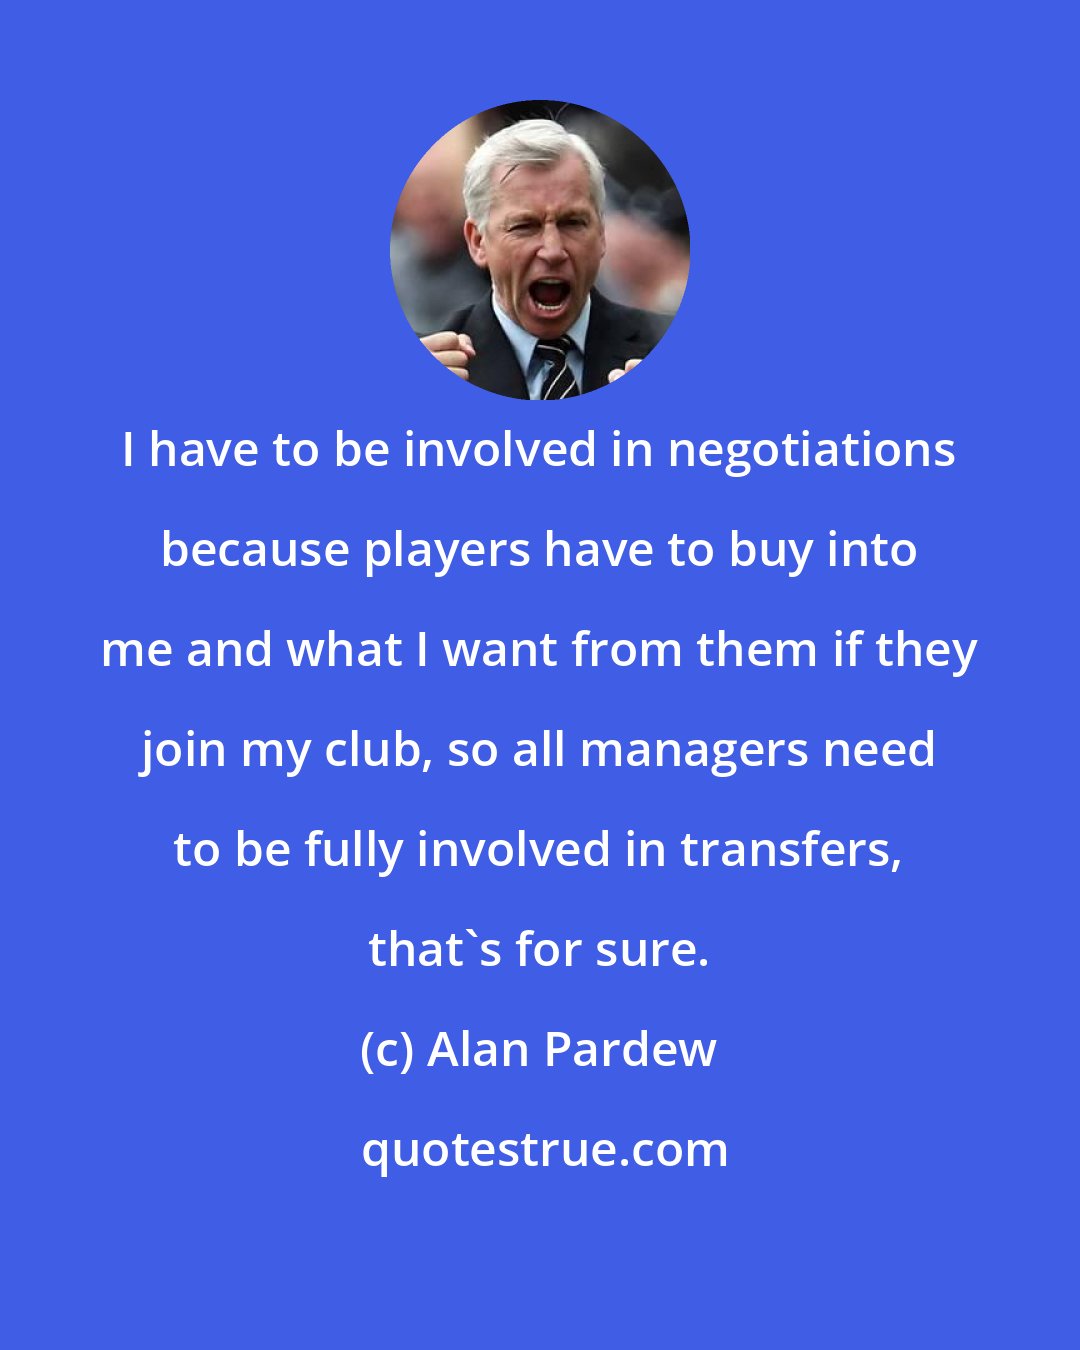 Alan Pardew: I have to be involved in negotiations because players have to buy into me and what I want from them if they join my club, so all managers need to be fully involved in transfers, that's for sure.